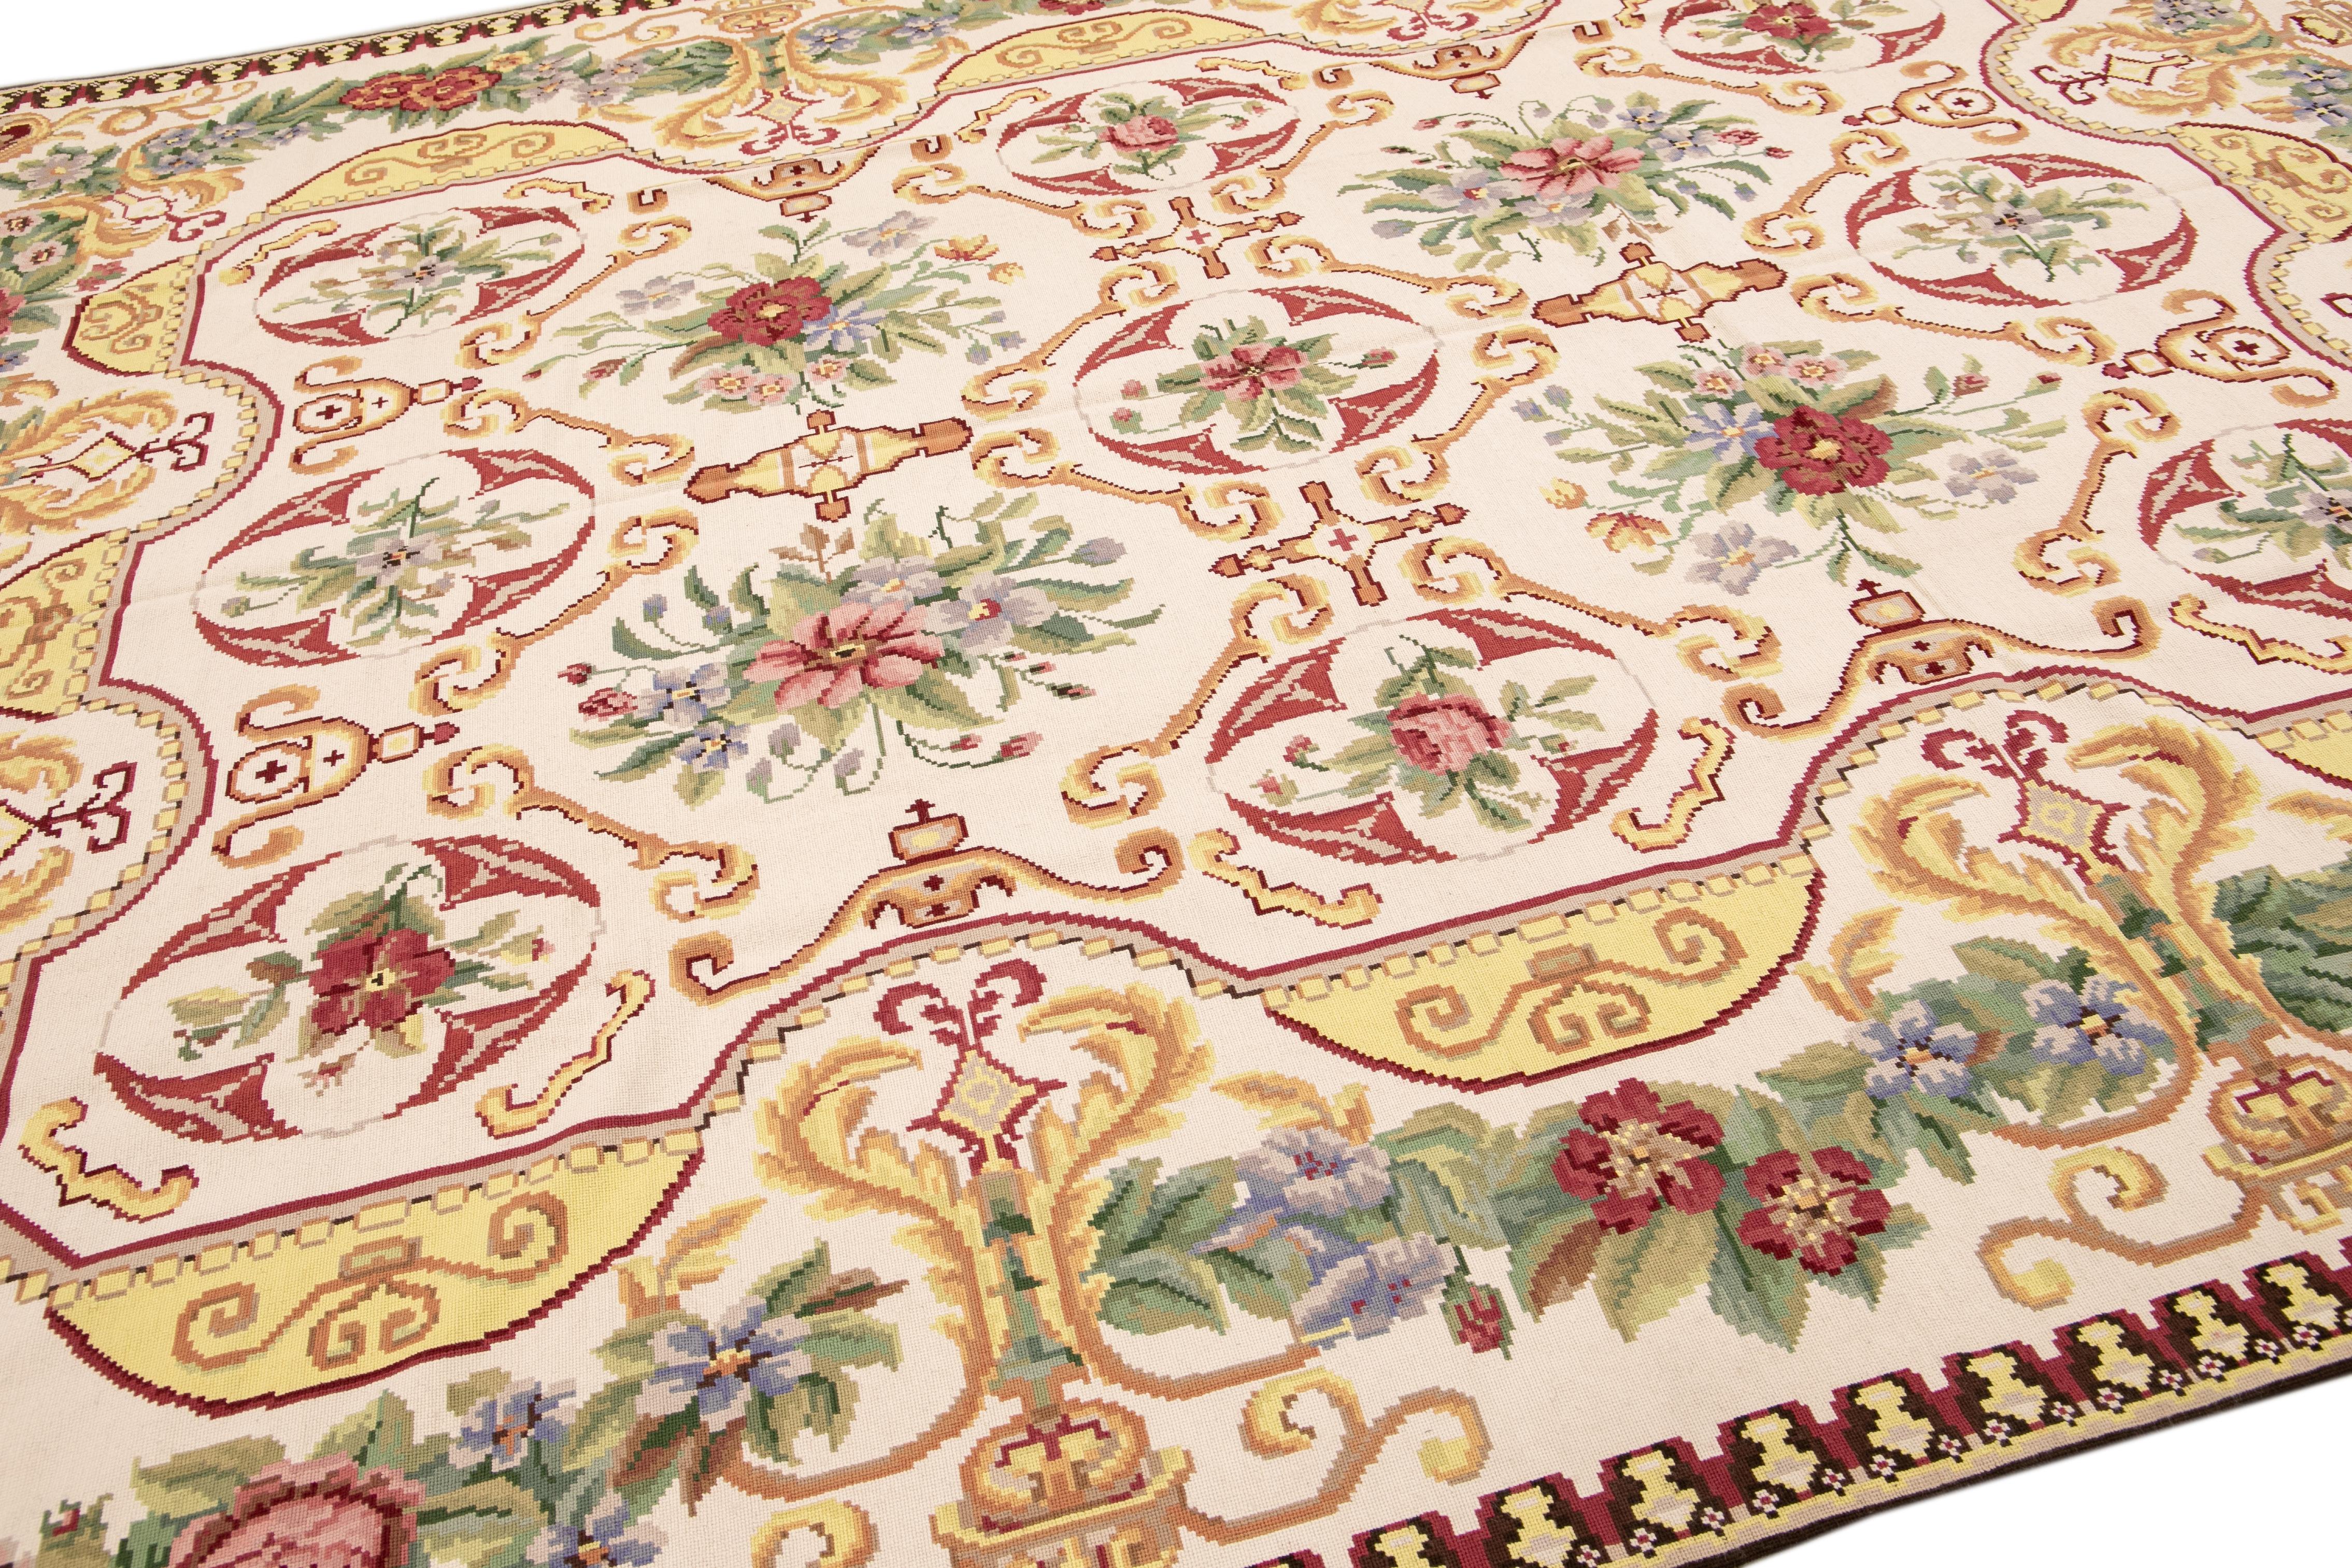 Hand-Knotted Vintage Aubusson Style Needlepoint Floral Pattern Ivory Wool Rug